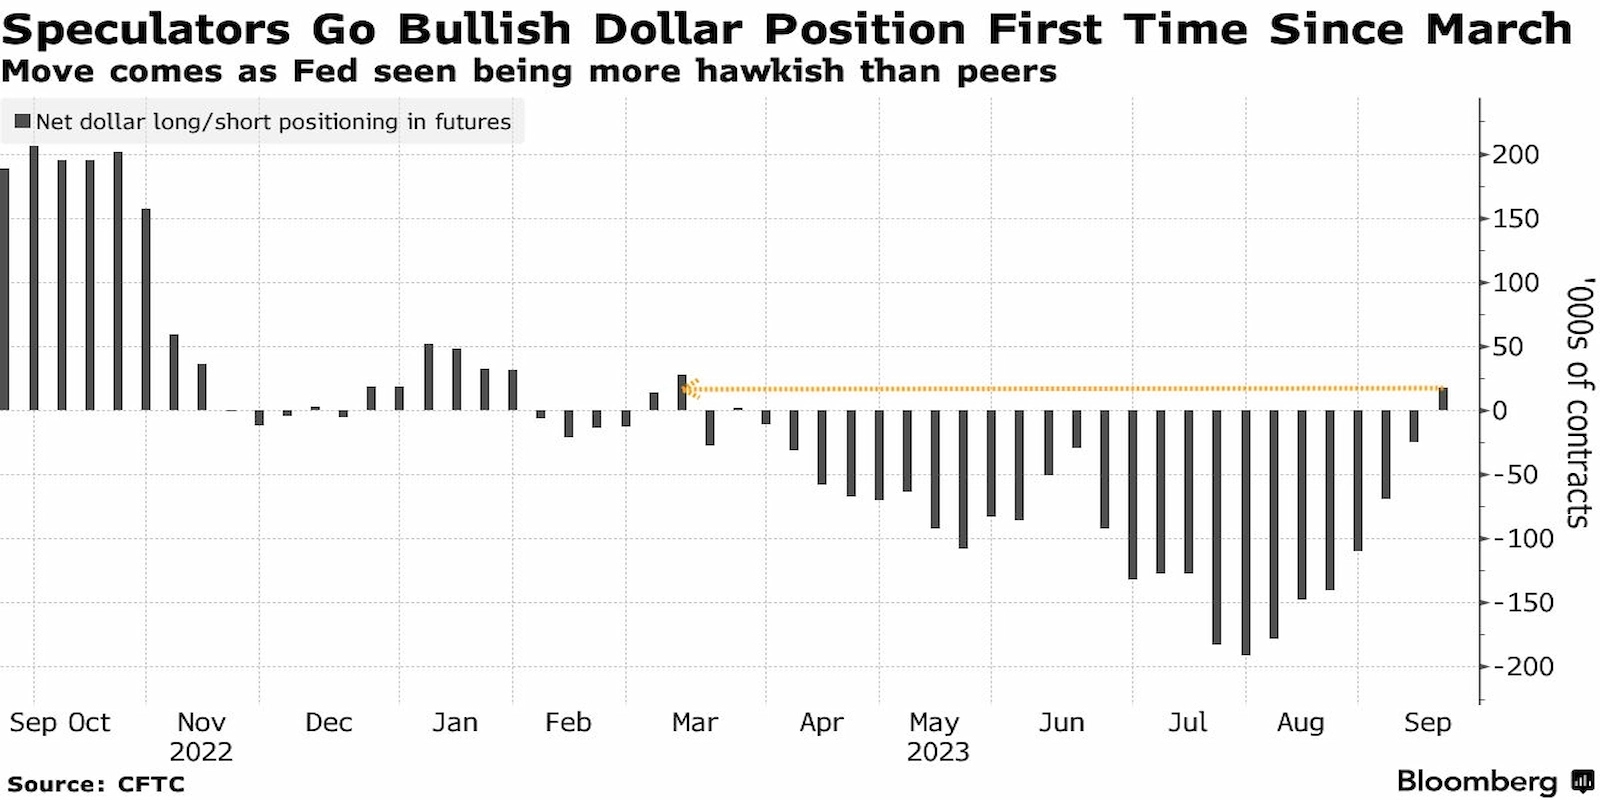 Bloomberg noted that speculators went bullish on the US dollar.